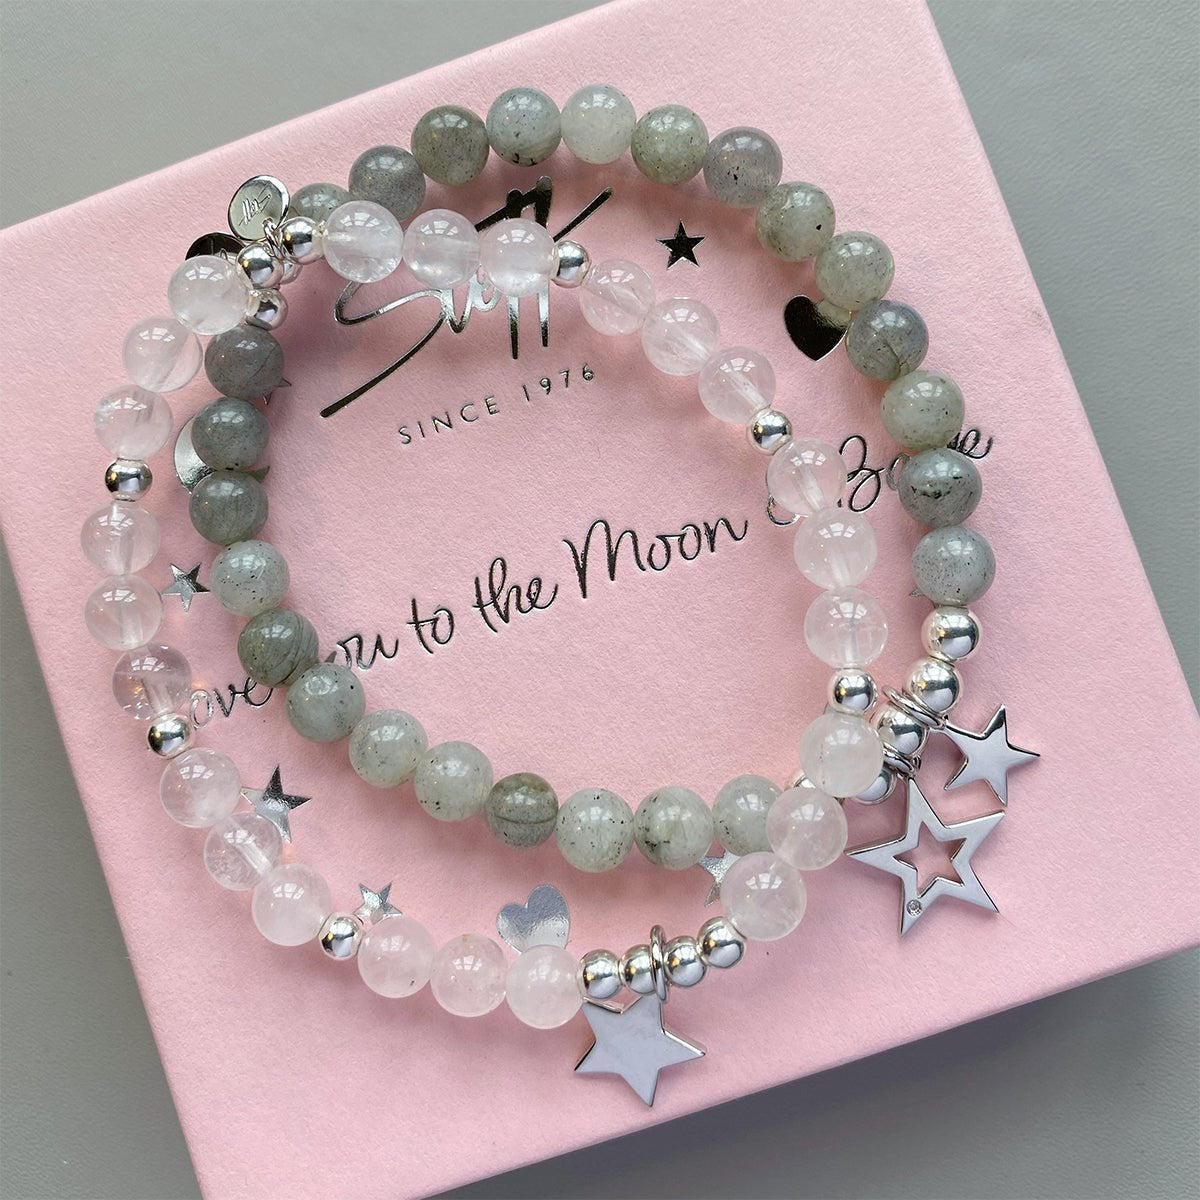 Steff Silver & Labradorite Bead Bracelets with Star Charms - Steffans Jewellers